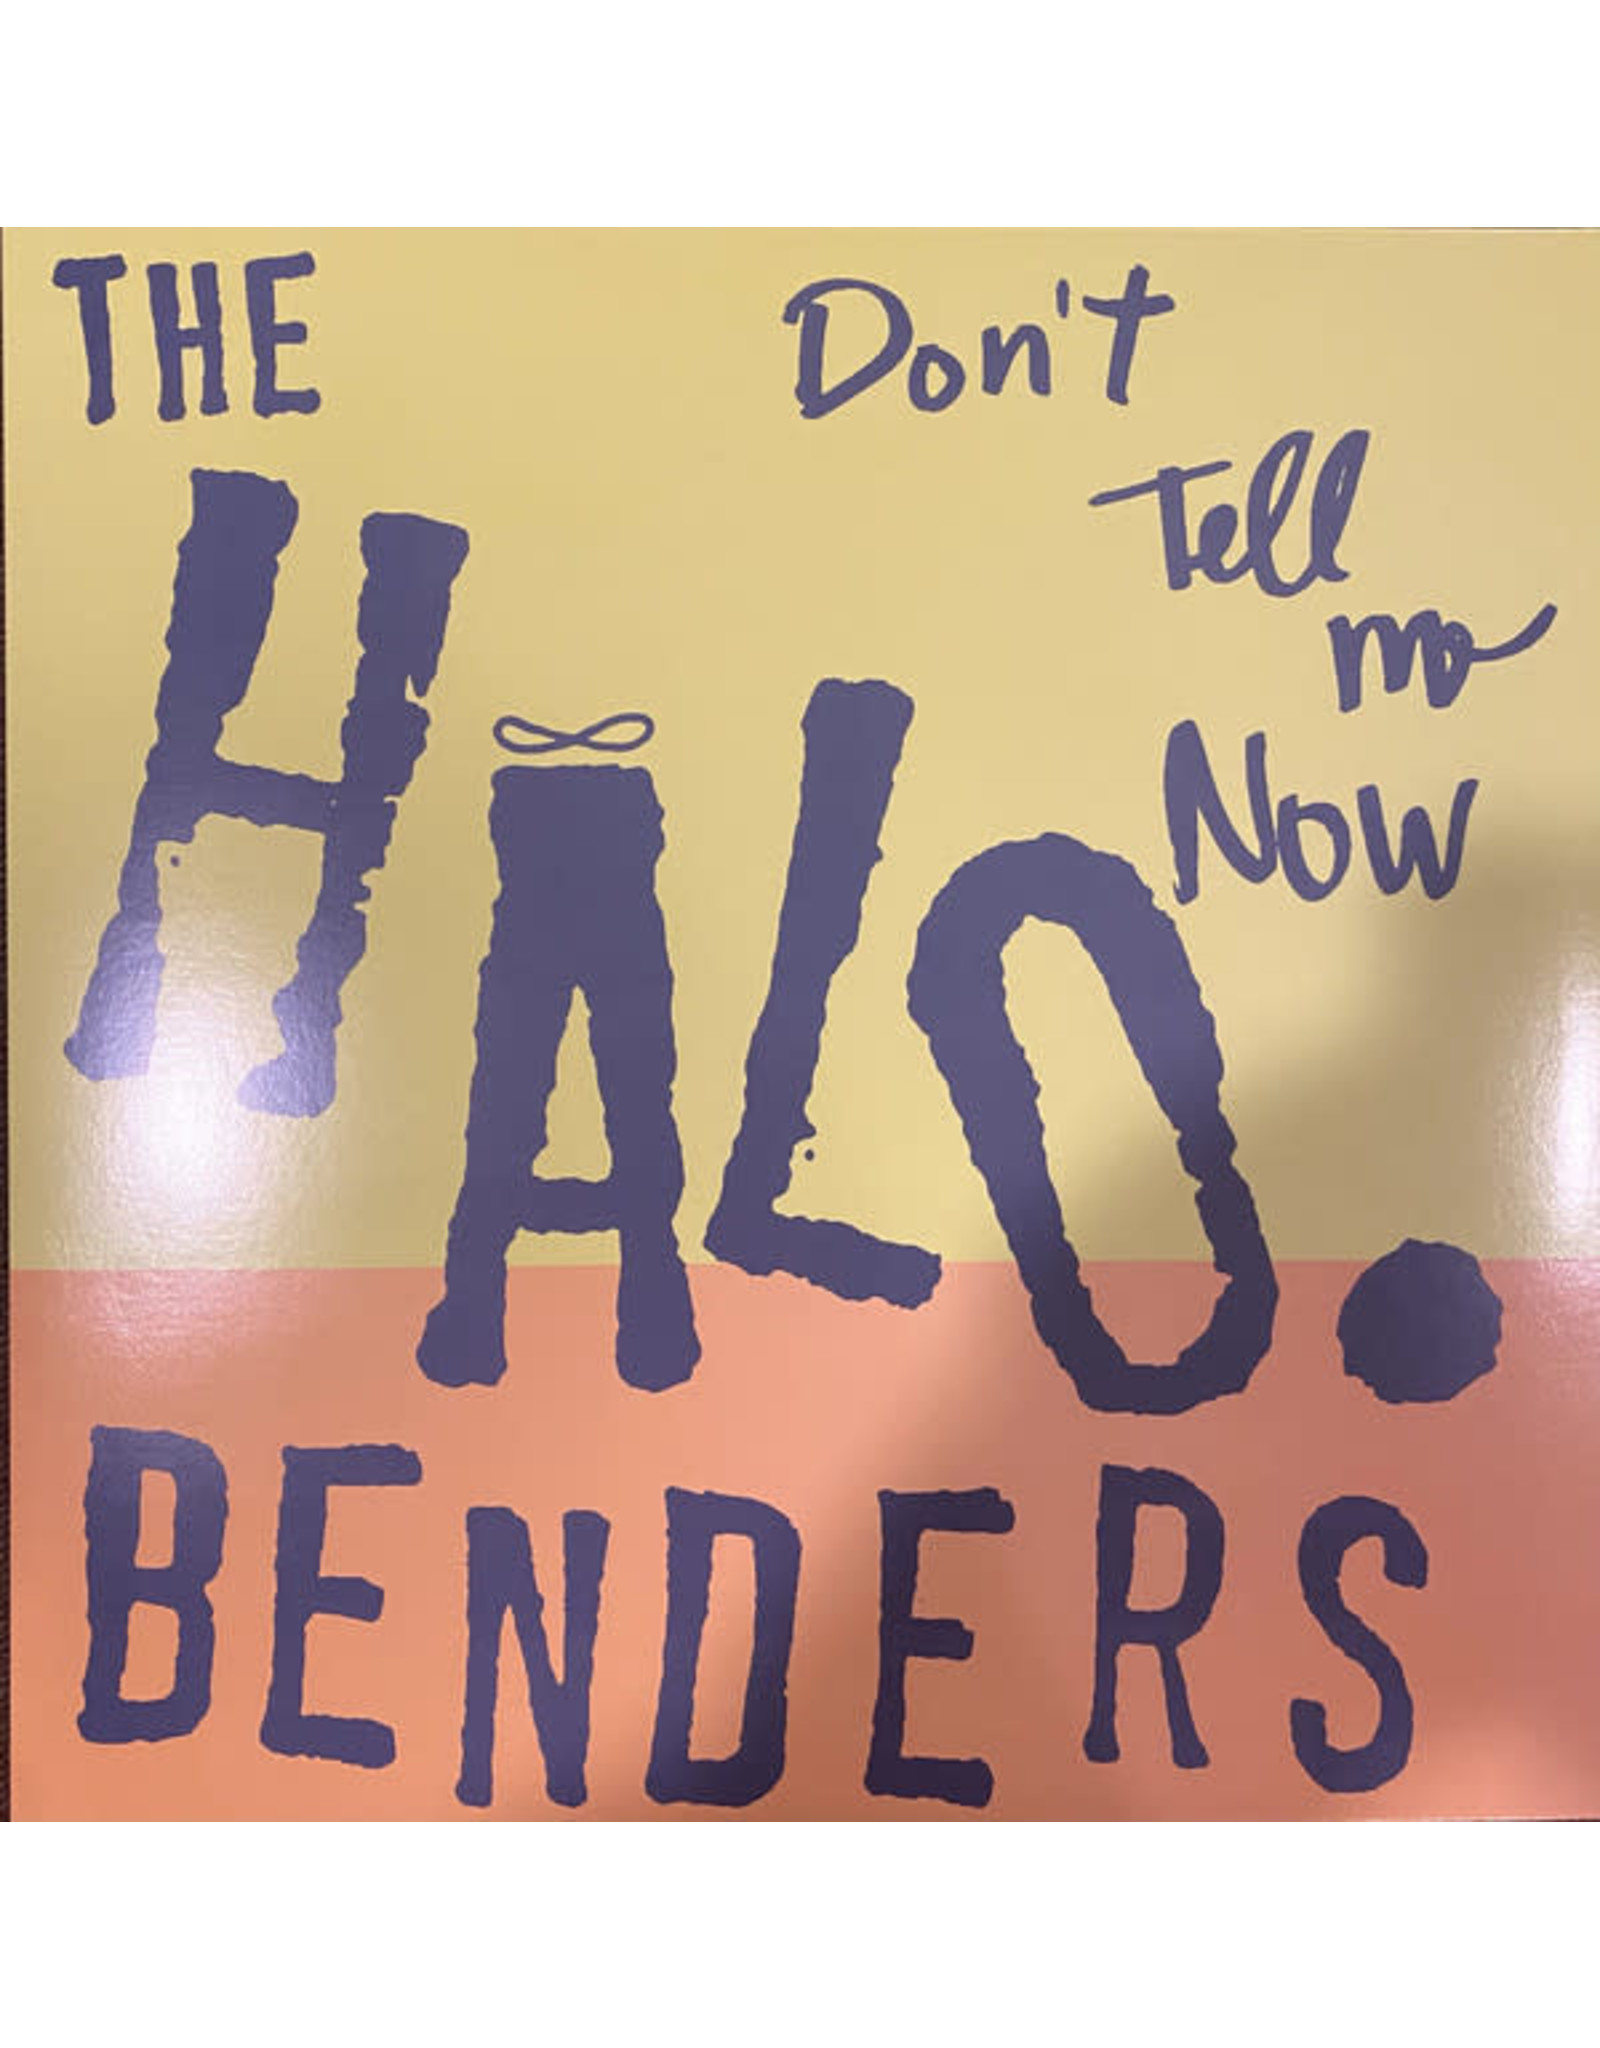 Halo Benders, The - Don't Tell Me Now LP